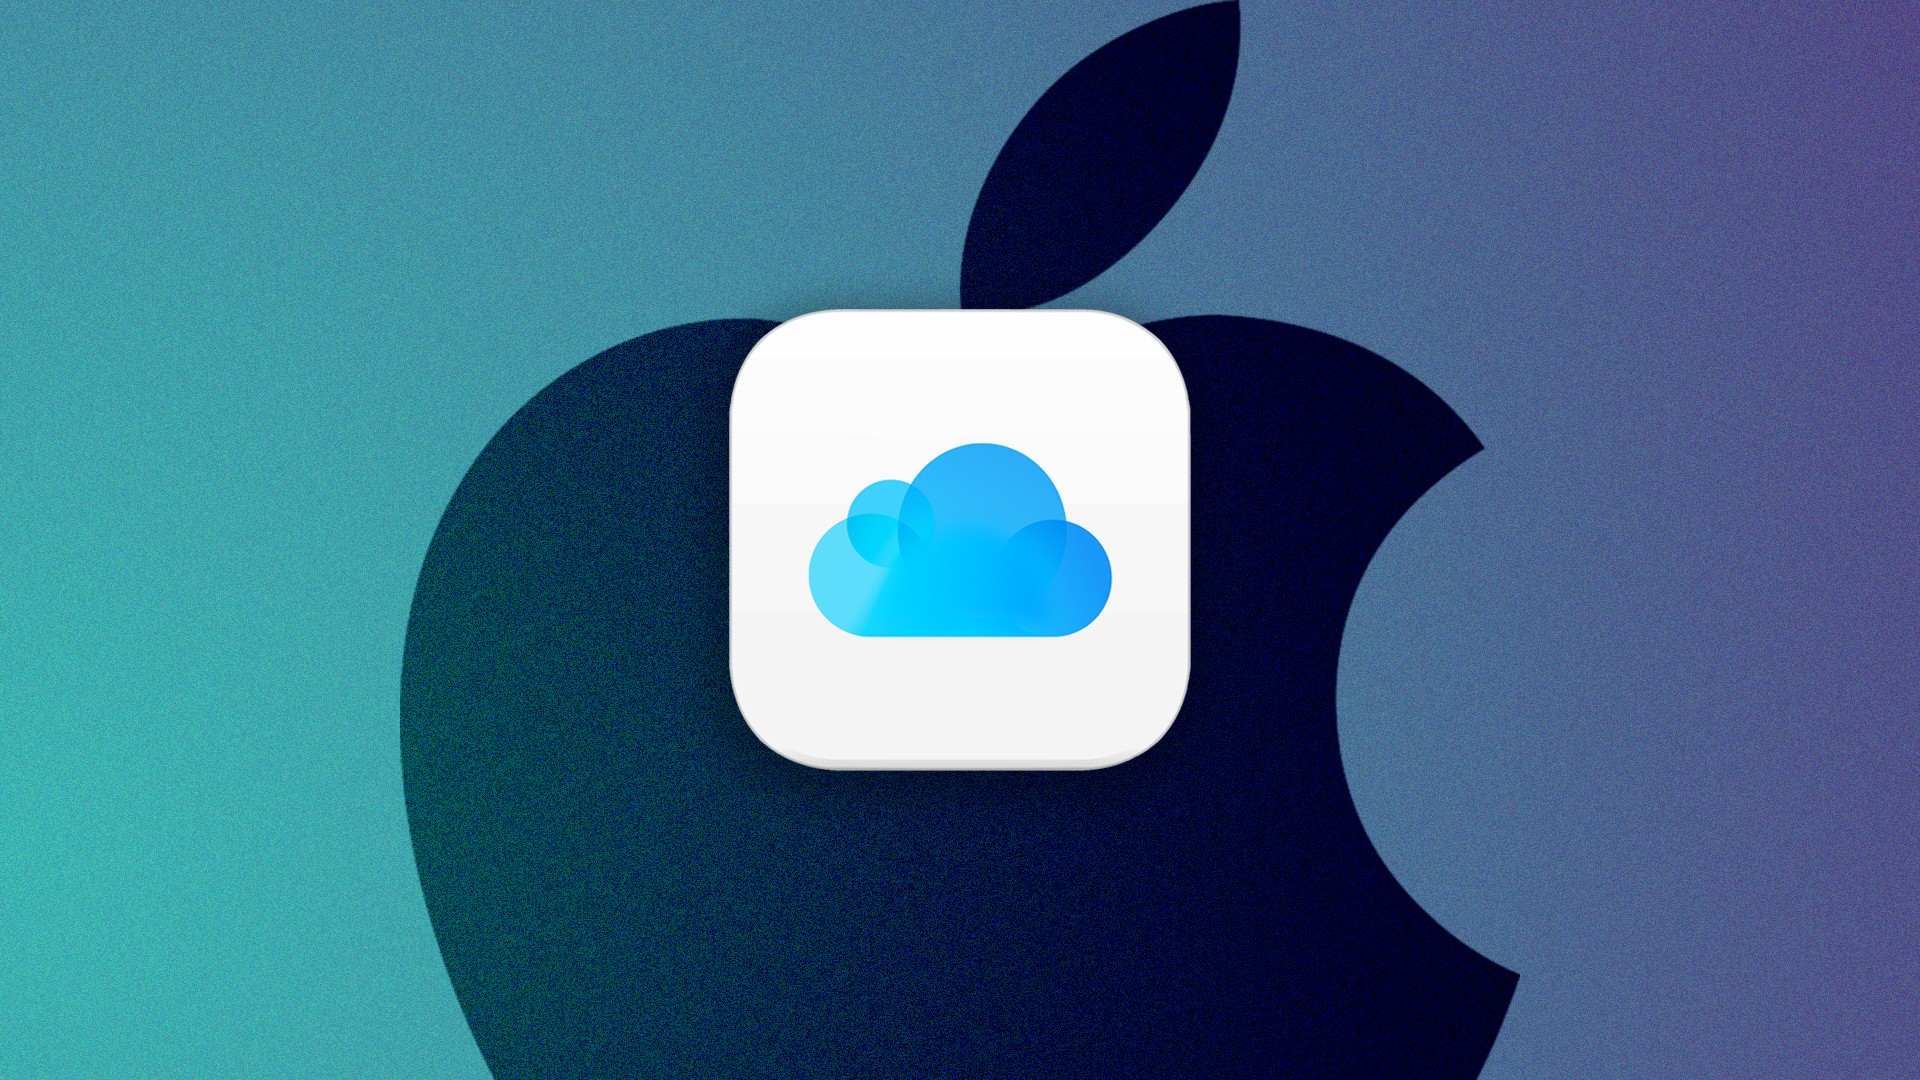 Version of iCloud in the browser receives a new layout with elements that resemble the iPad
